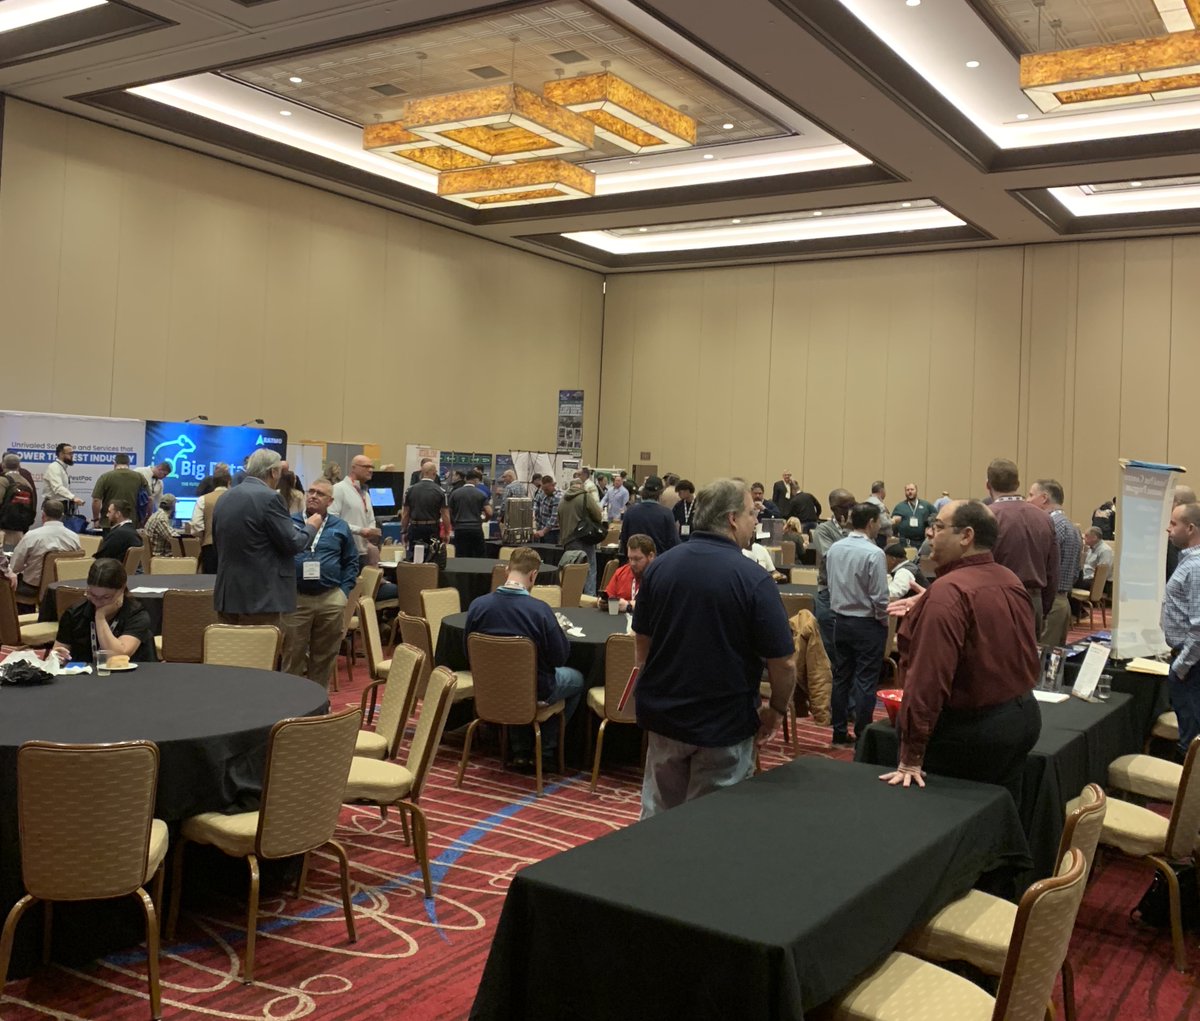 Full house at the @NationalPestMgt Eastern Conference. Looking forward to a great conference and meeting everyone. 

#NPMA #integratedtickmanagement #publichealth #lymedisease #lymediseaseawareness